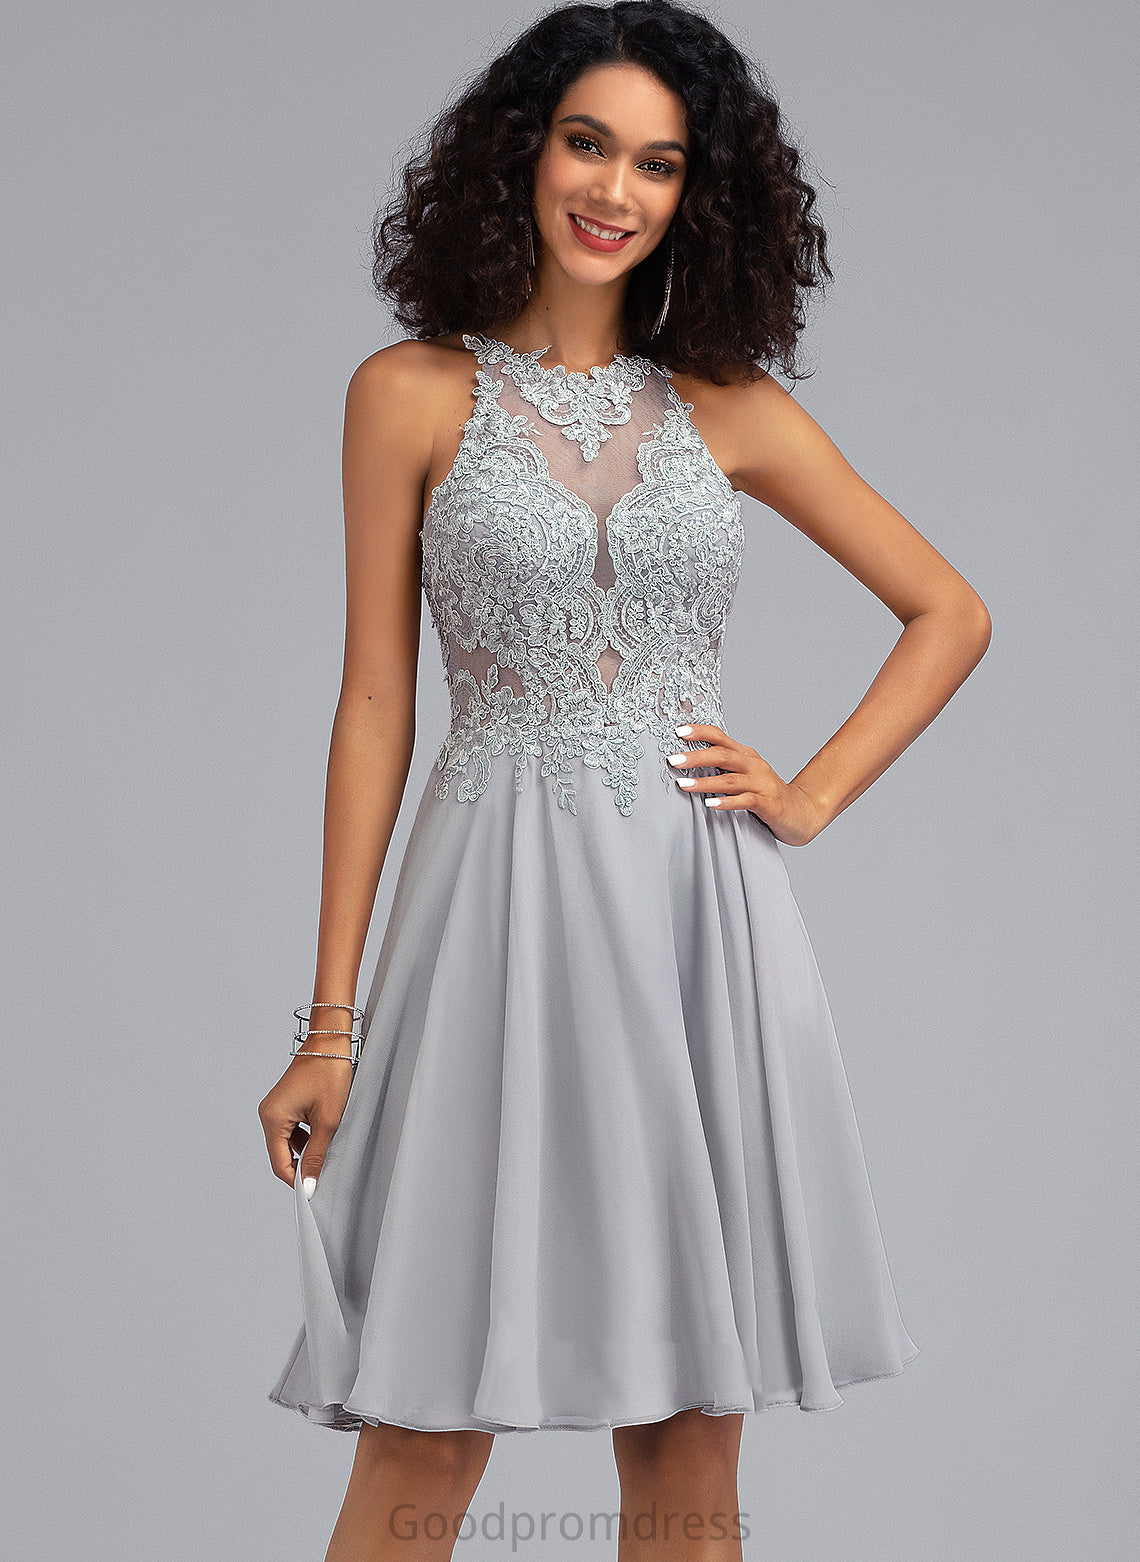 Chiffon Knee-Length Jocelynn Homecoming Dresses Scoop Sequins A-Line Neck With Homecoming Dress